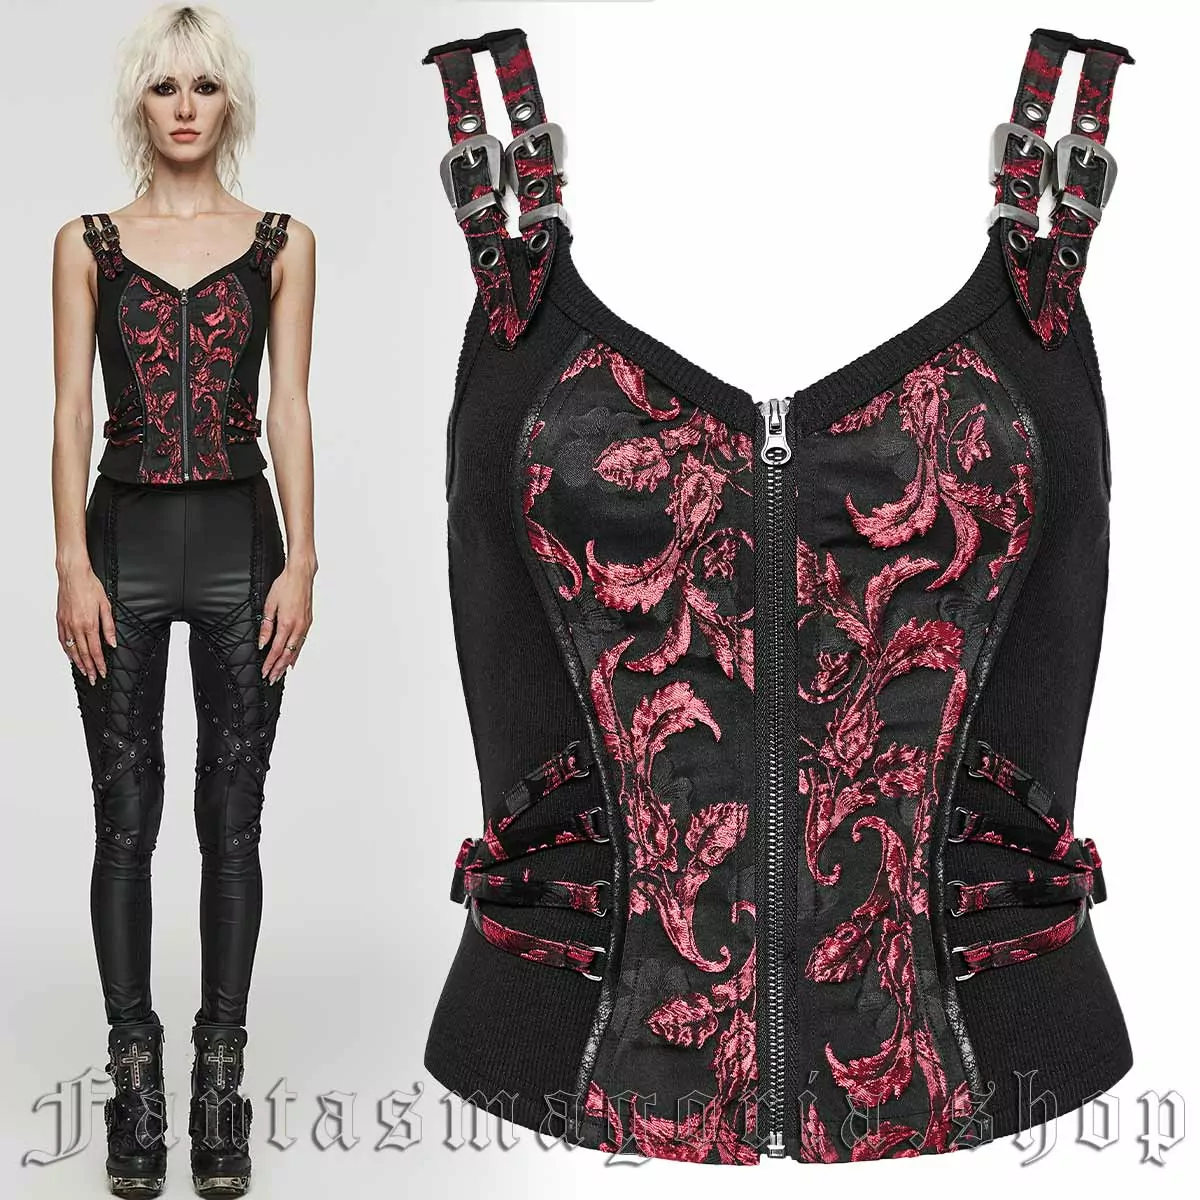 Women's Gothic black and ornate red fabric corset style zip-up front top. - Punk Rave - WY-1037MJF/BK-RD